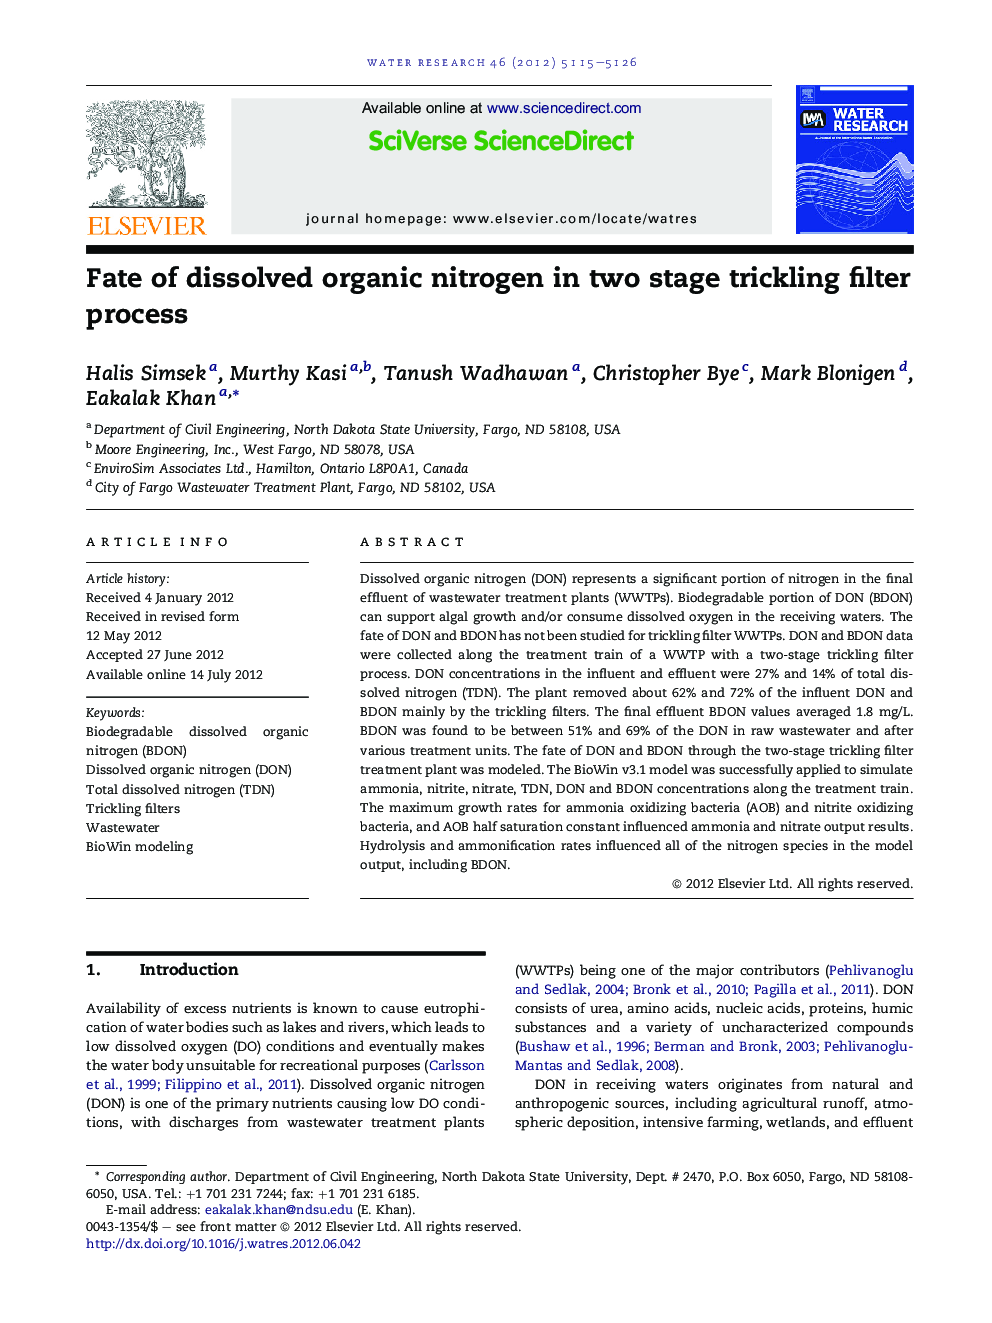 Fate of dissolved organic nitrogen in two stage trickling filter process